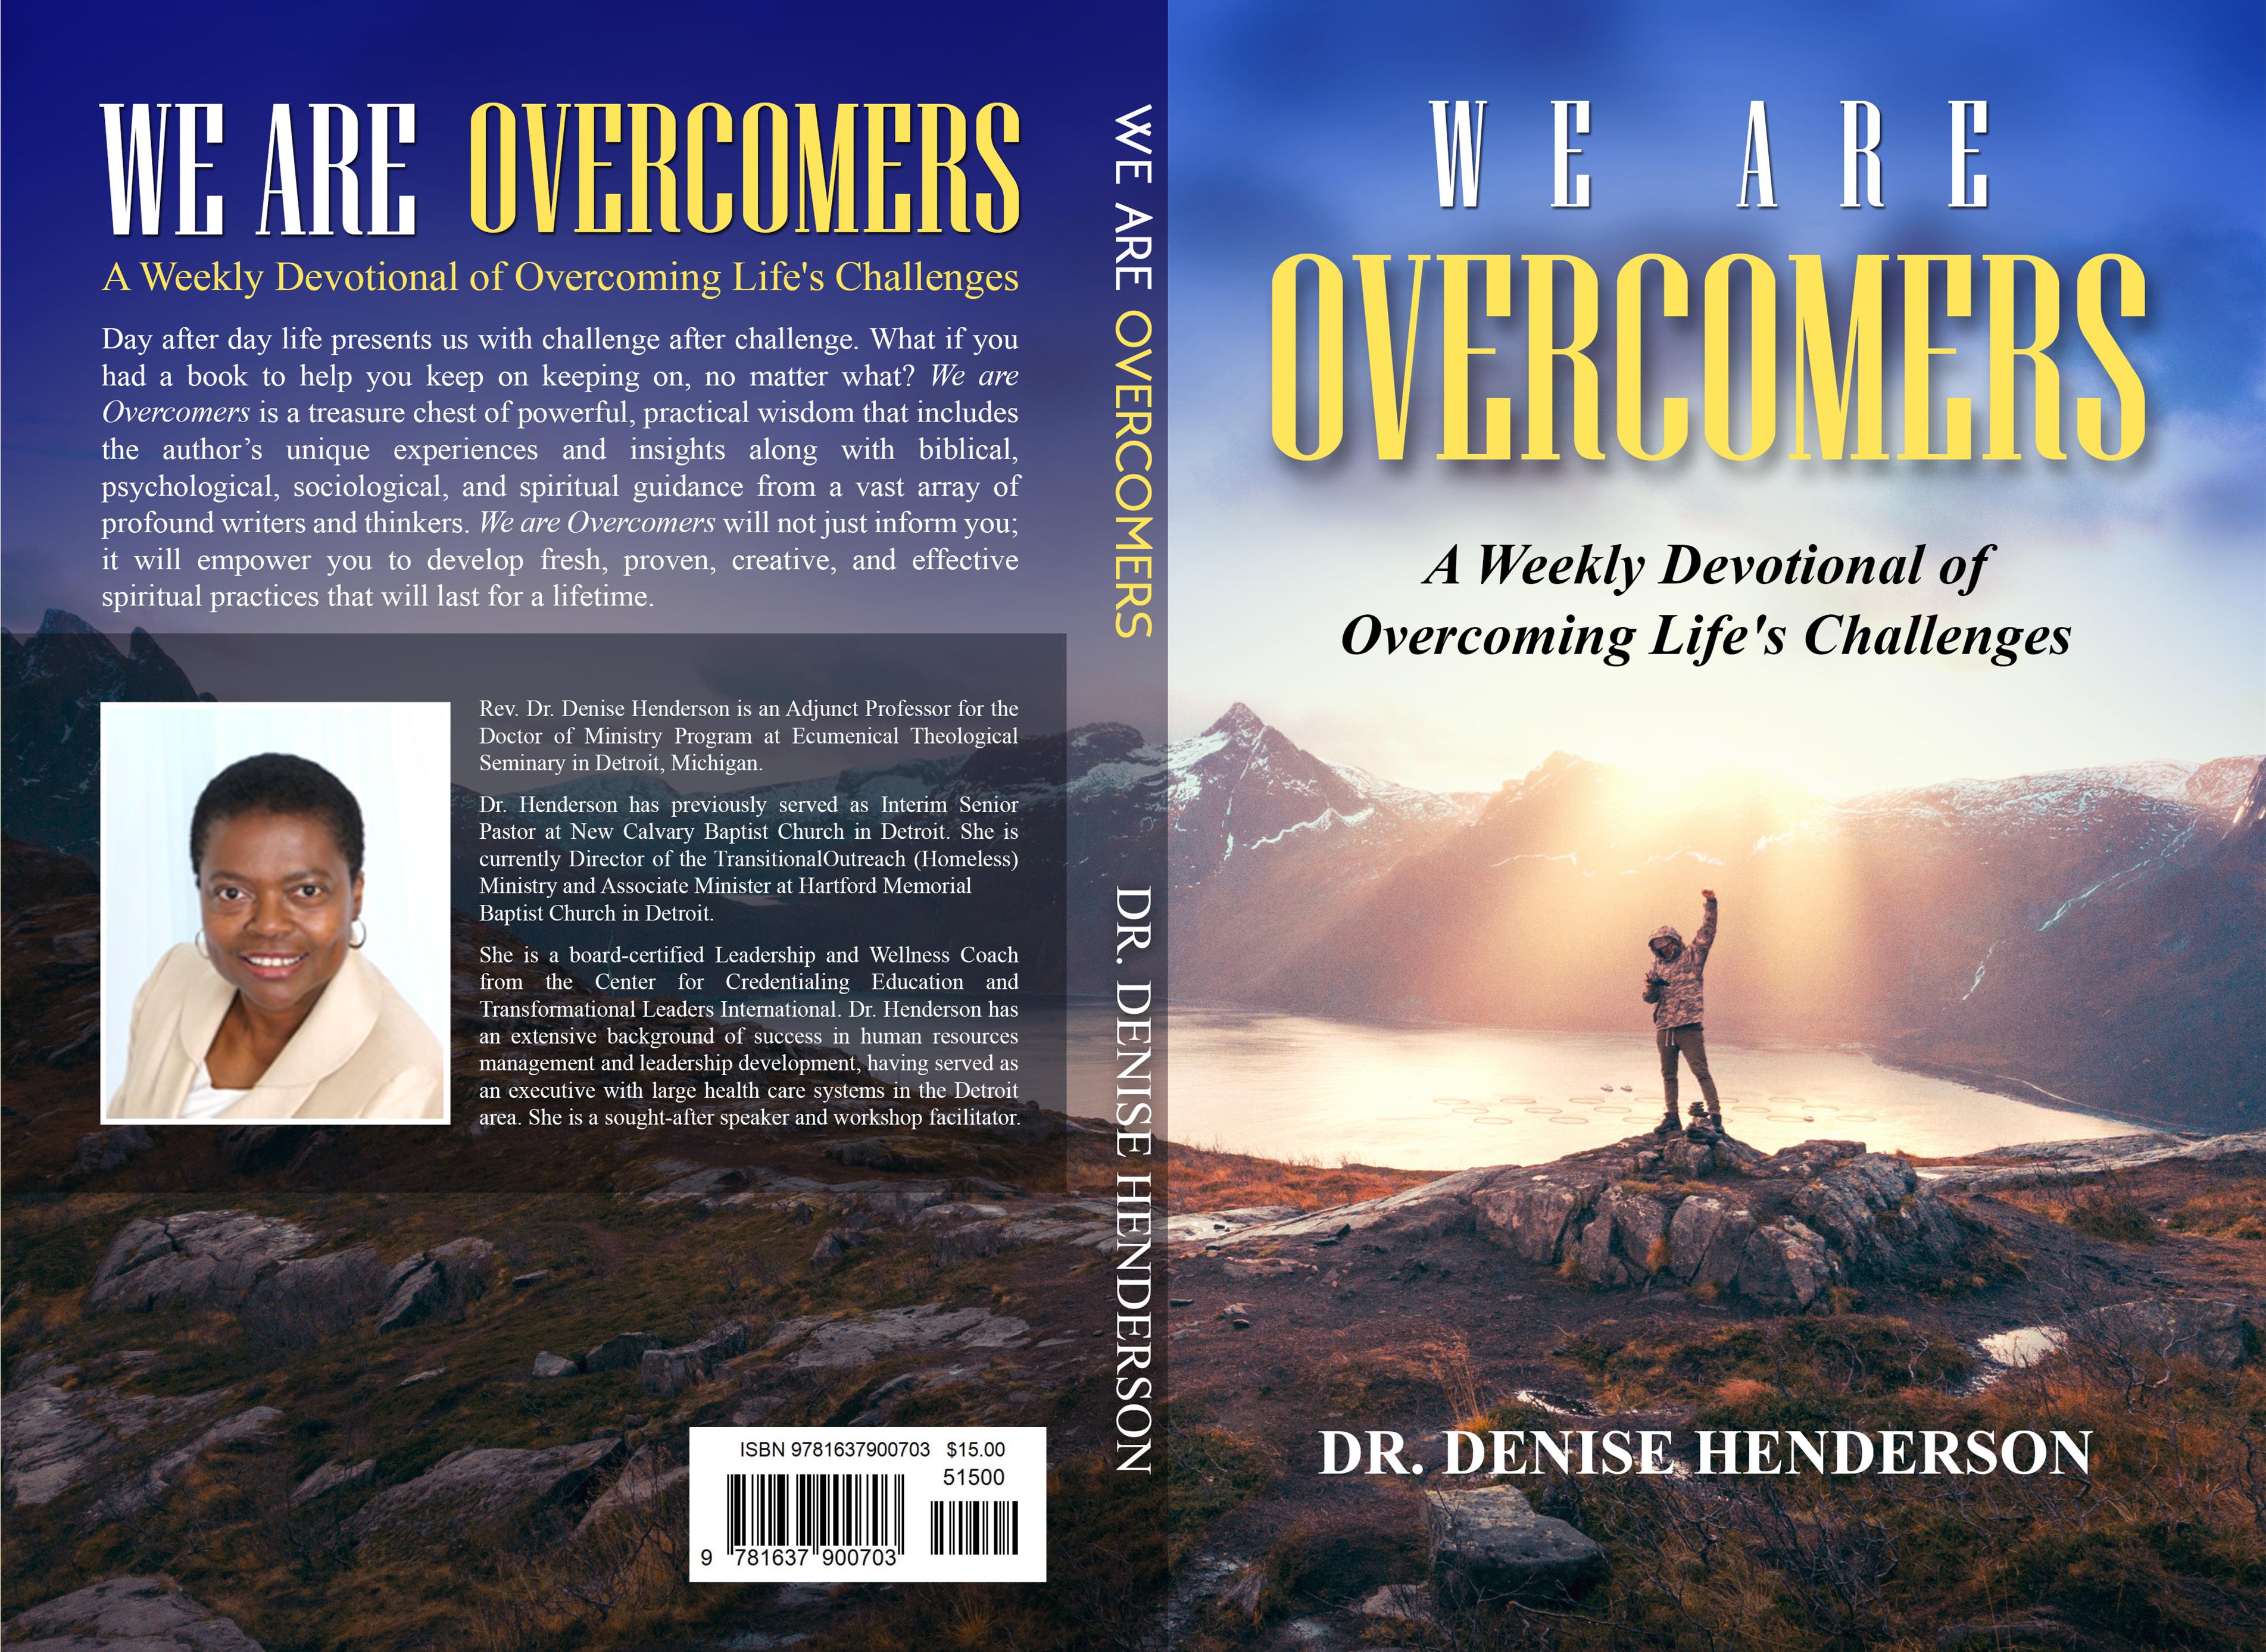 We are Overcomers: A Weekly Devotional of Overcoming Life